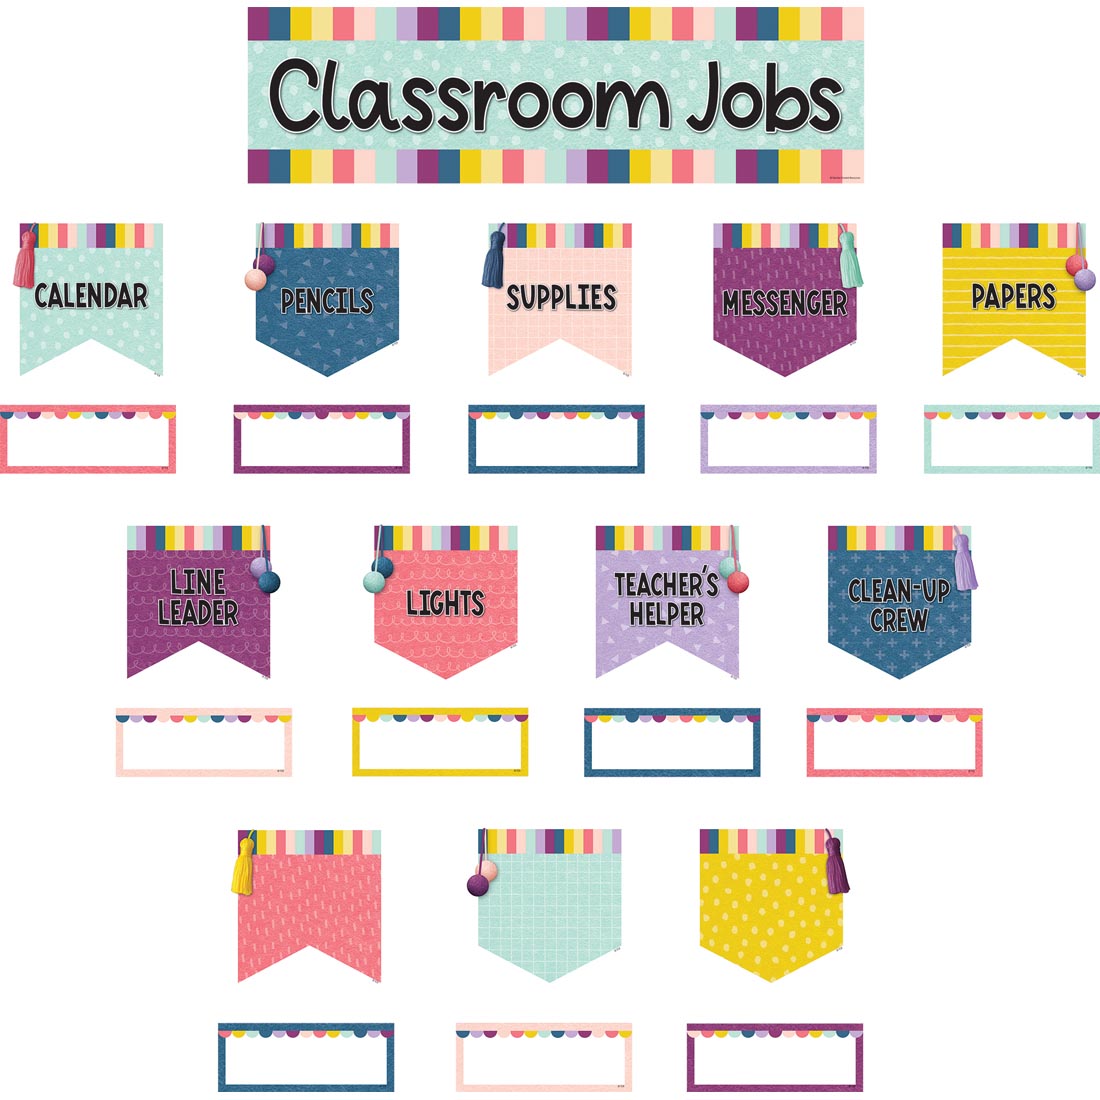 Classroom Jobs Mini Bulletin Board Set from the Oh Happy Day collection by Teacher Created Resources